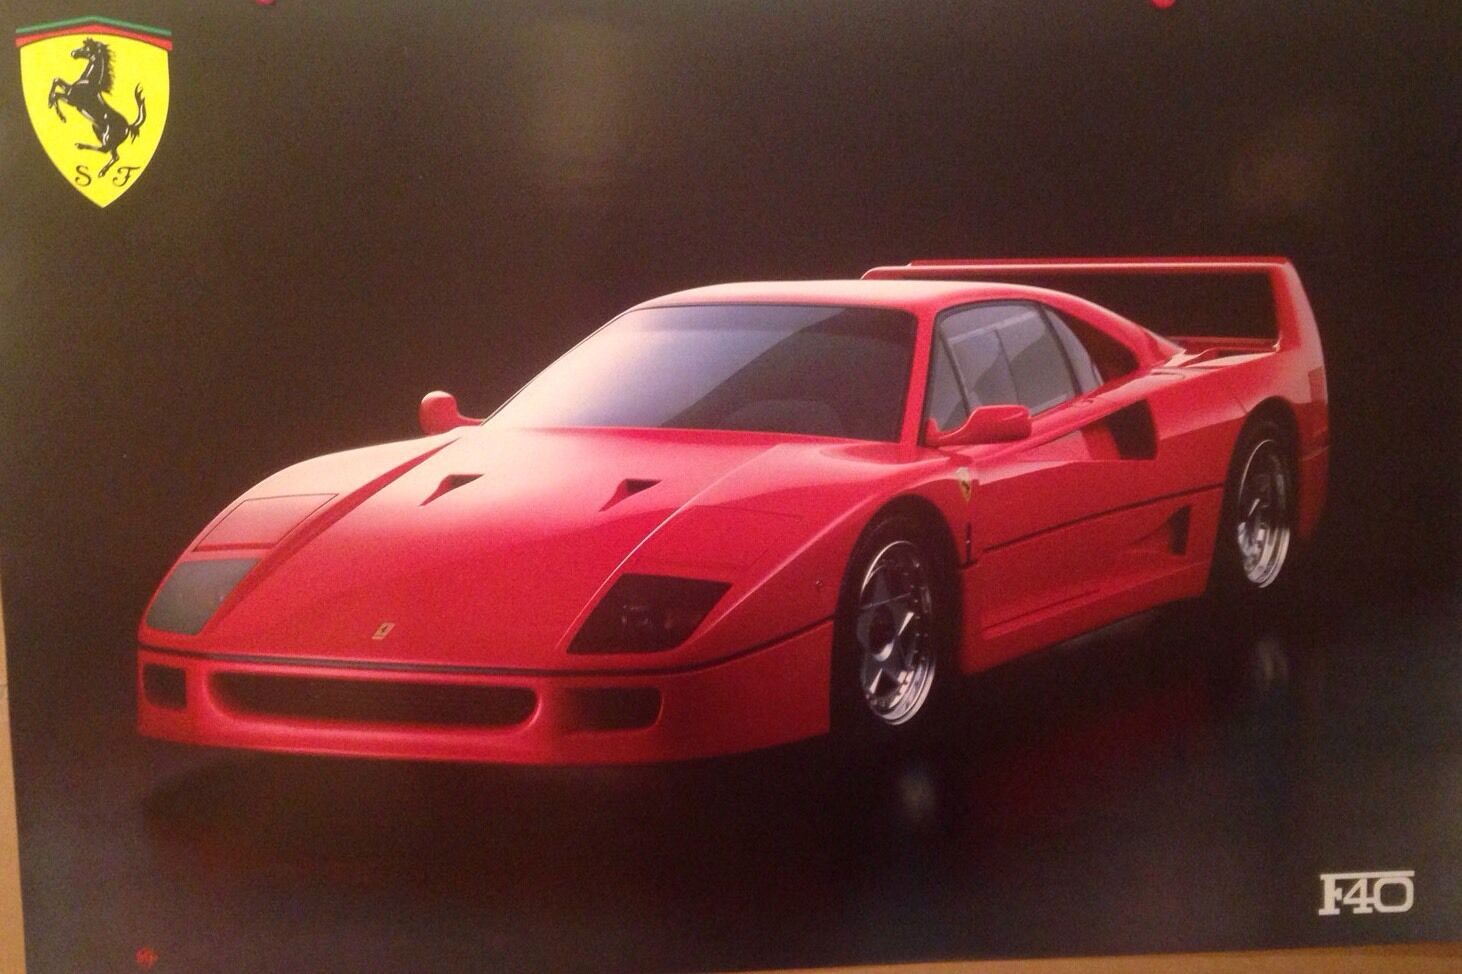 Ferrari F40 Factory Maranello UK Produced Extremely Rare Out Of Print Car Poster